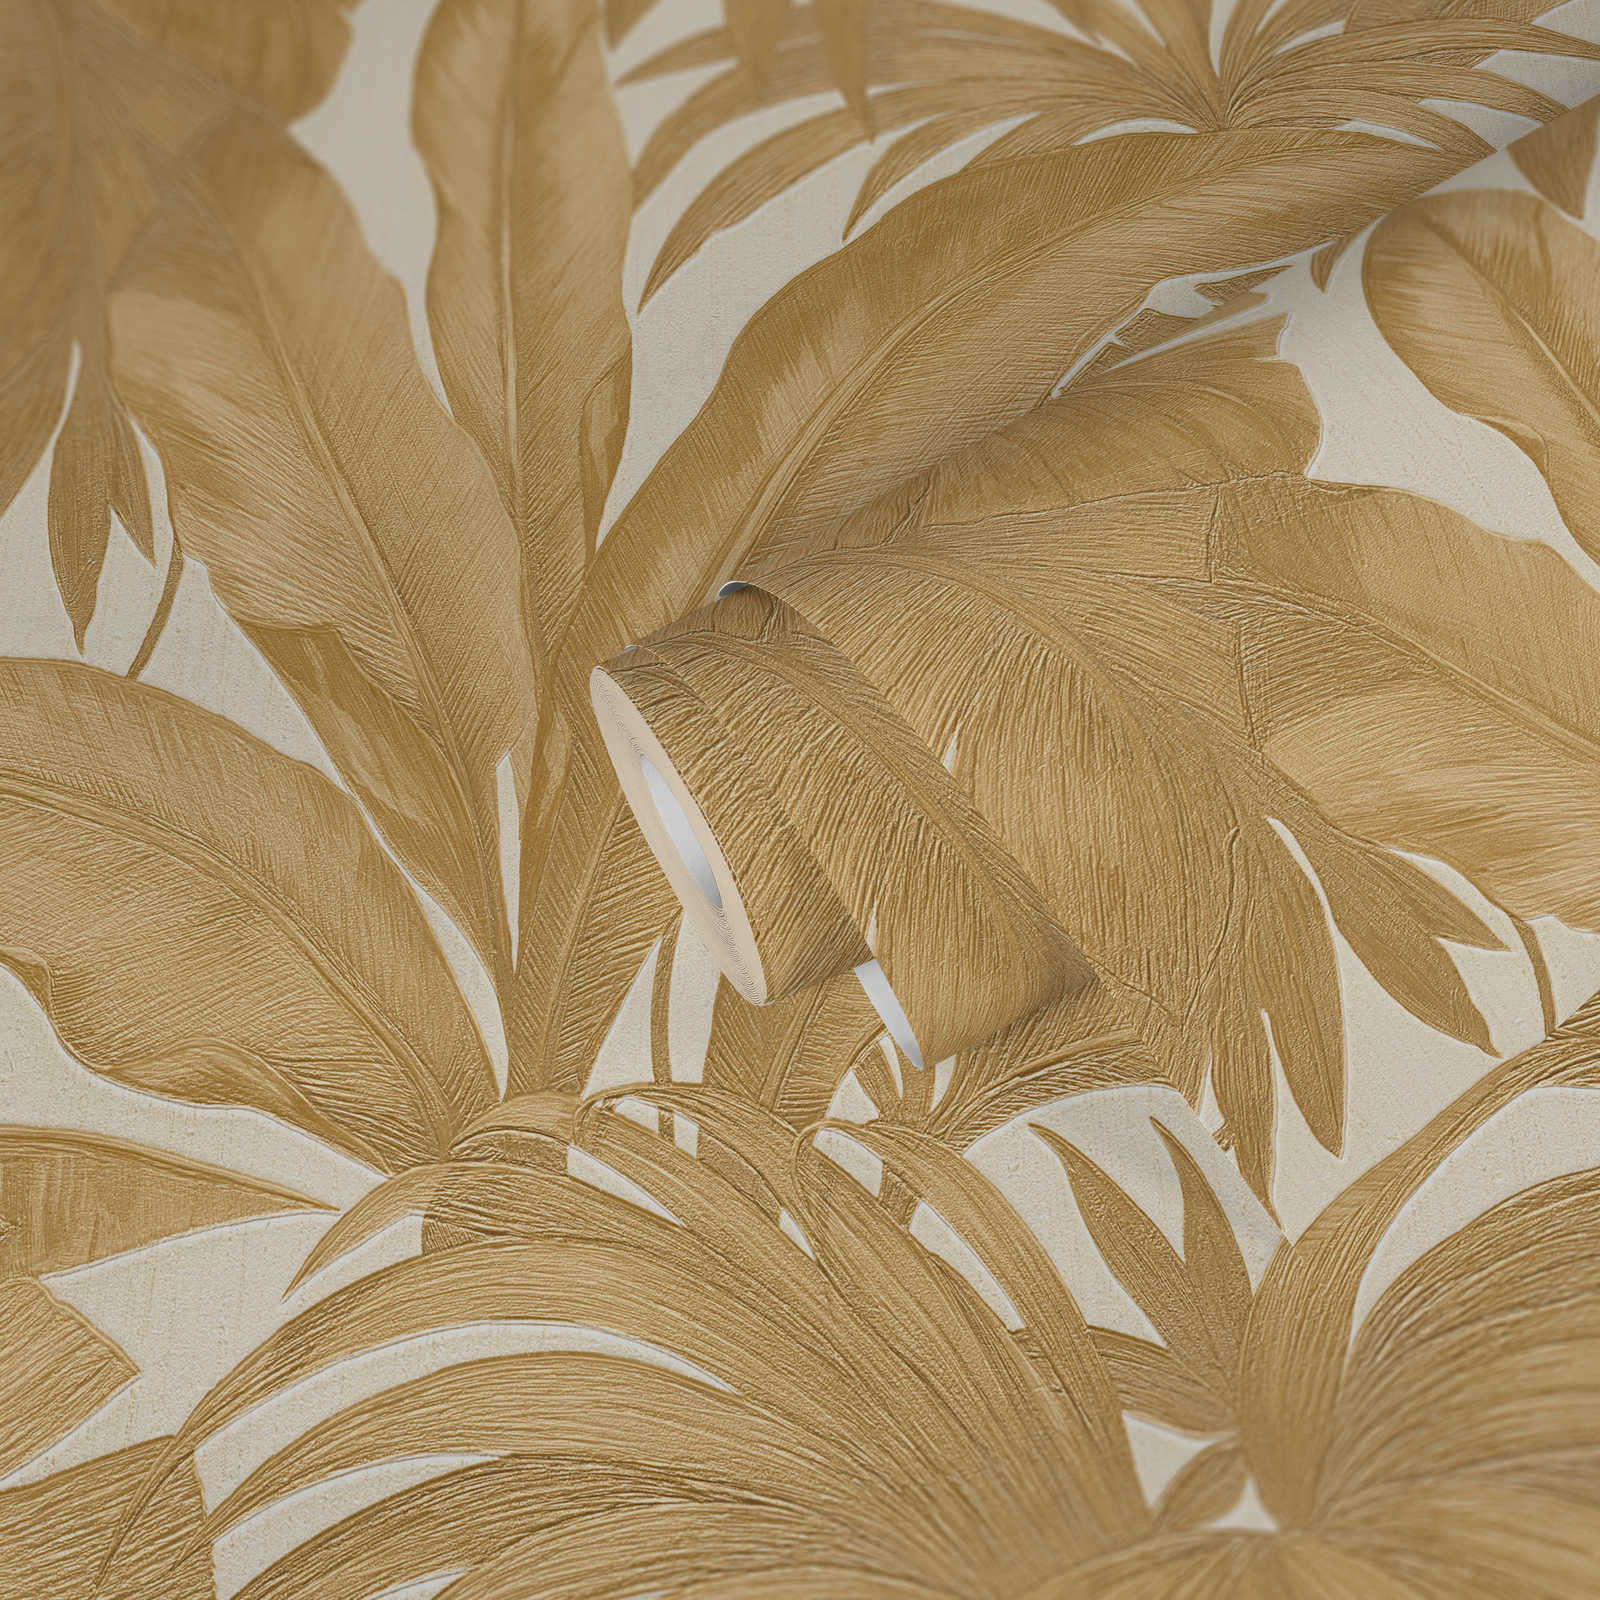             VERSACE wallpaper with palm trees & gold effect - cream, metallic
        